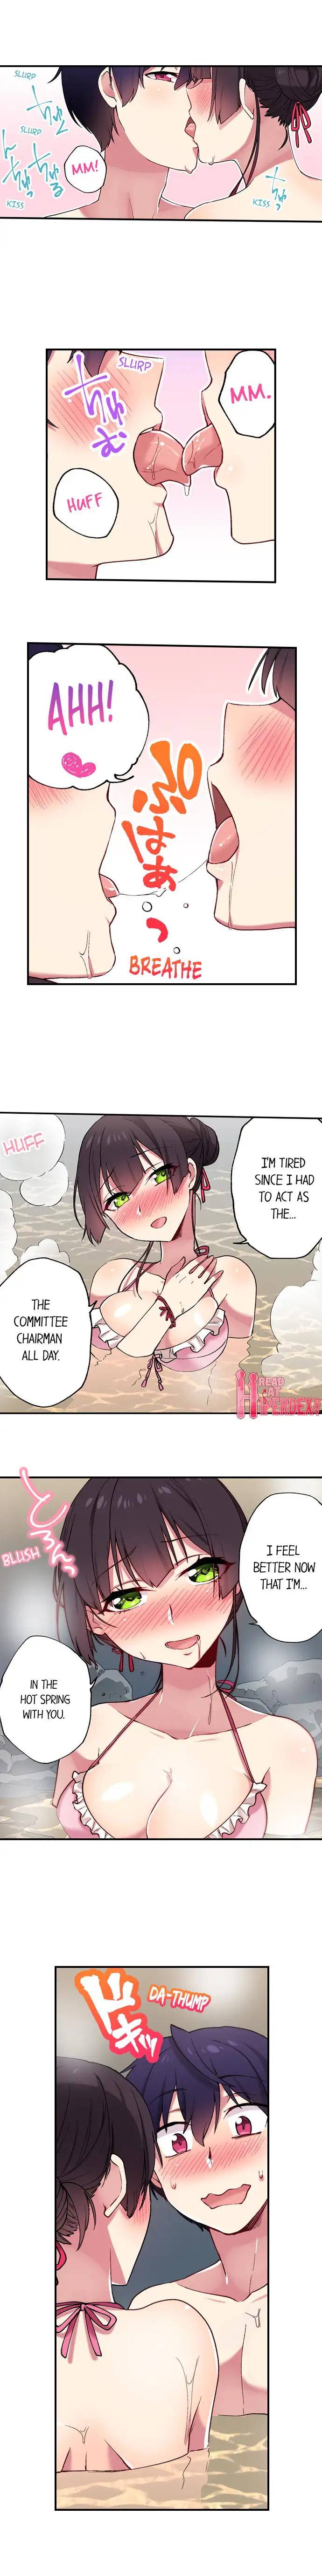 Committee Chairman, Didn’t You Just Masturbate In the Bathroom? I Can See the Number of Times People Orgasm - Chapter 62 Page 2